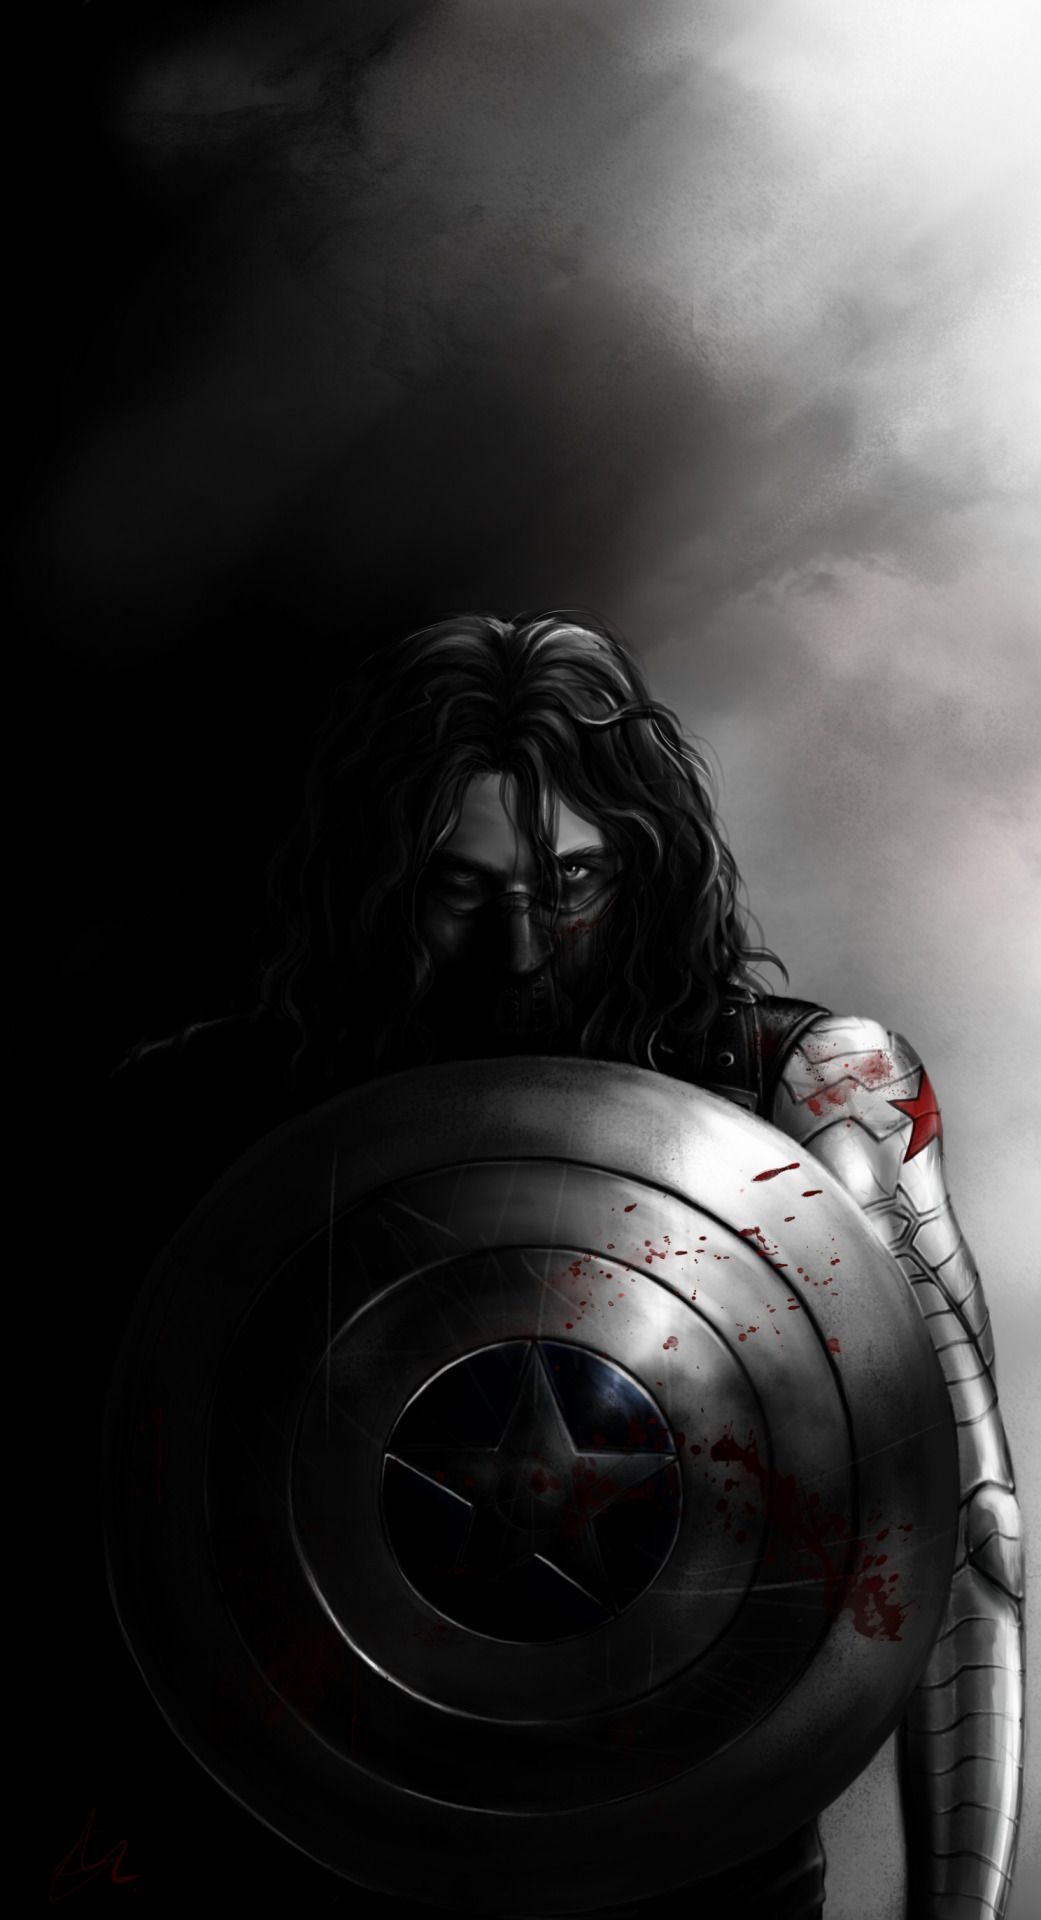 Full HD Mobile Winter Soldier Wallpapers - Wallpaper Cave